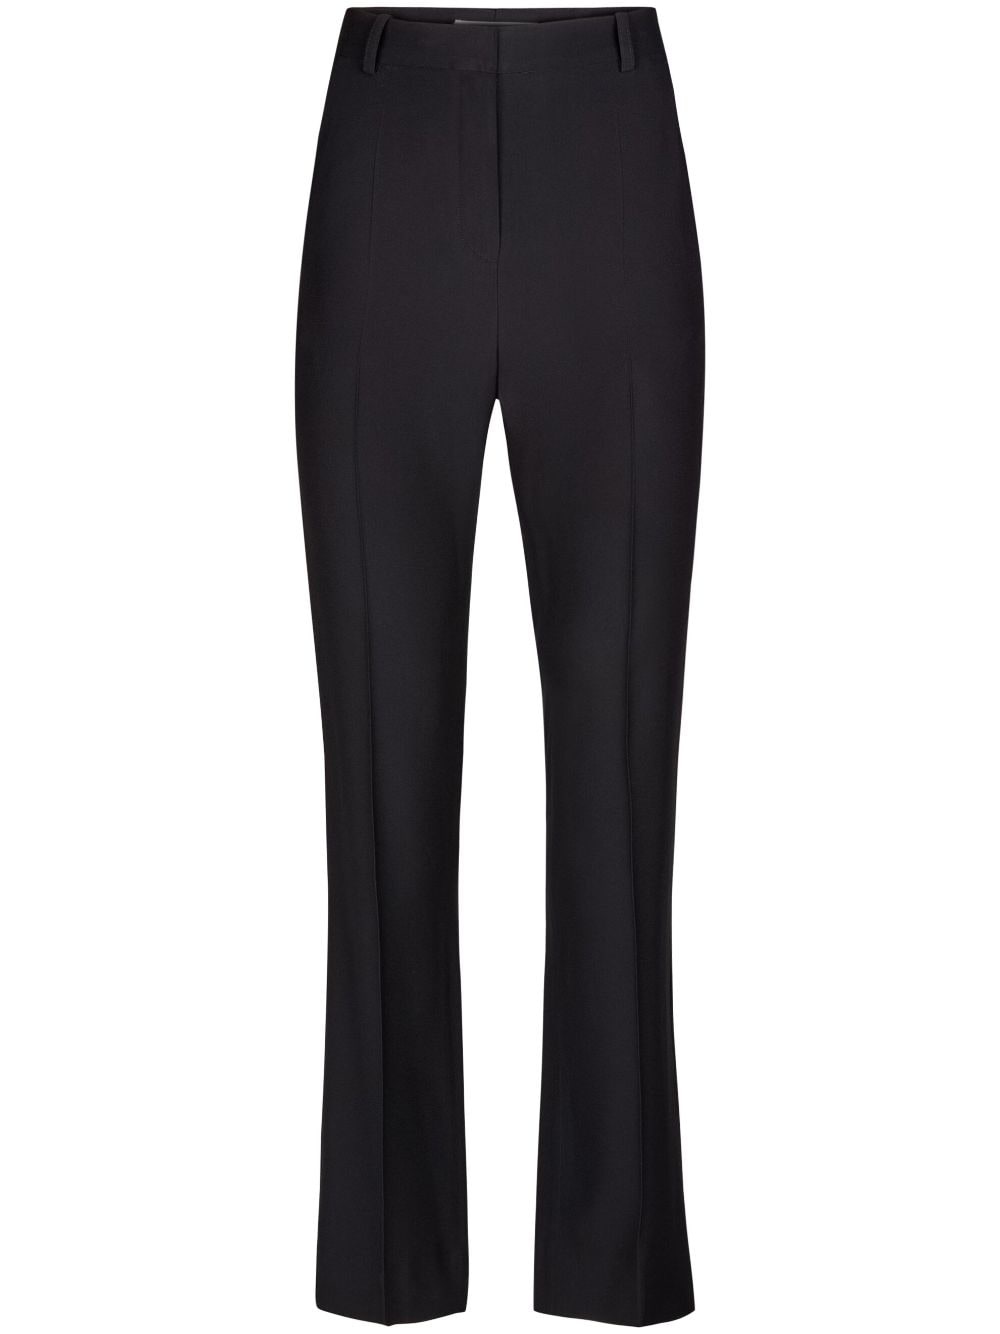 pressed-crease tailored trousers - 1